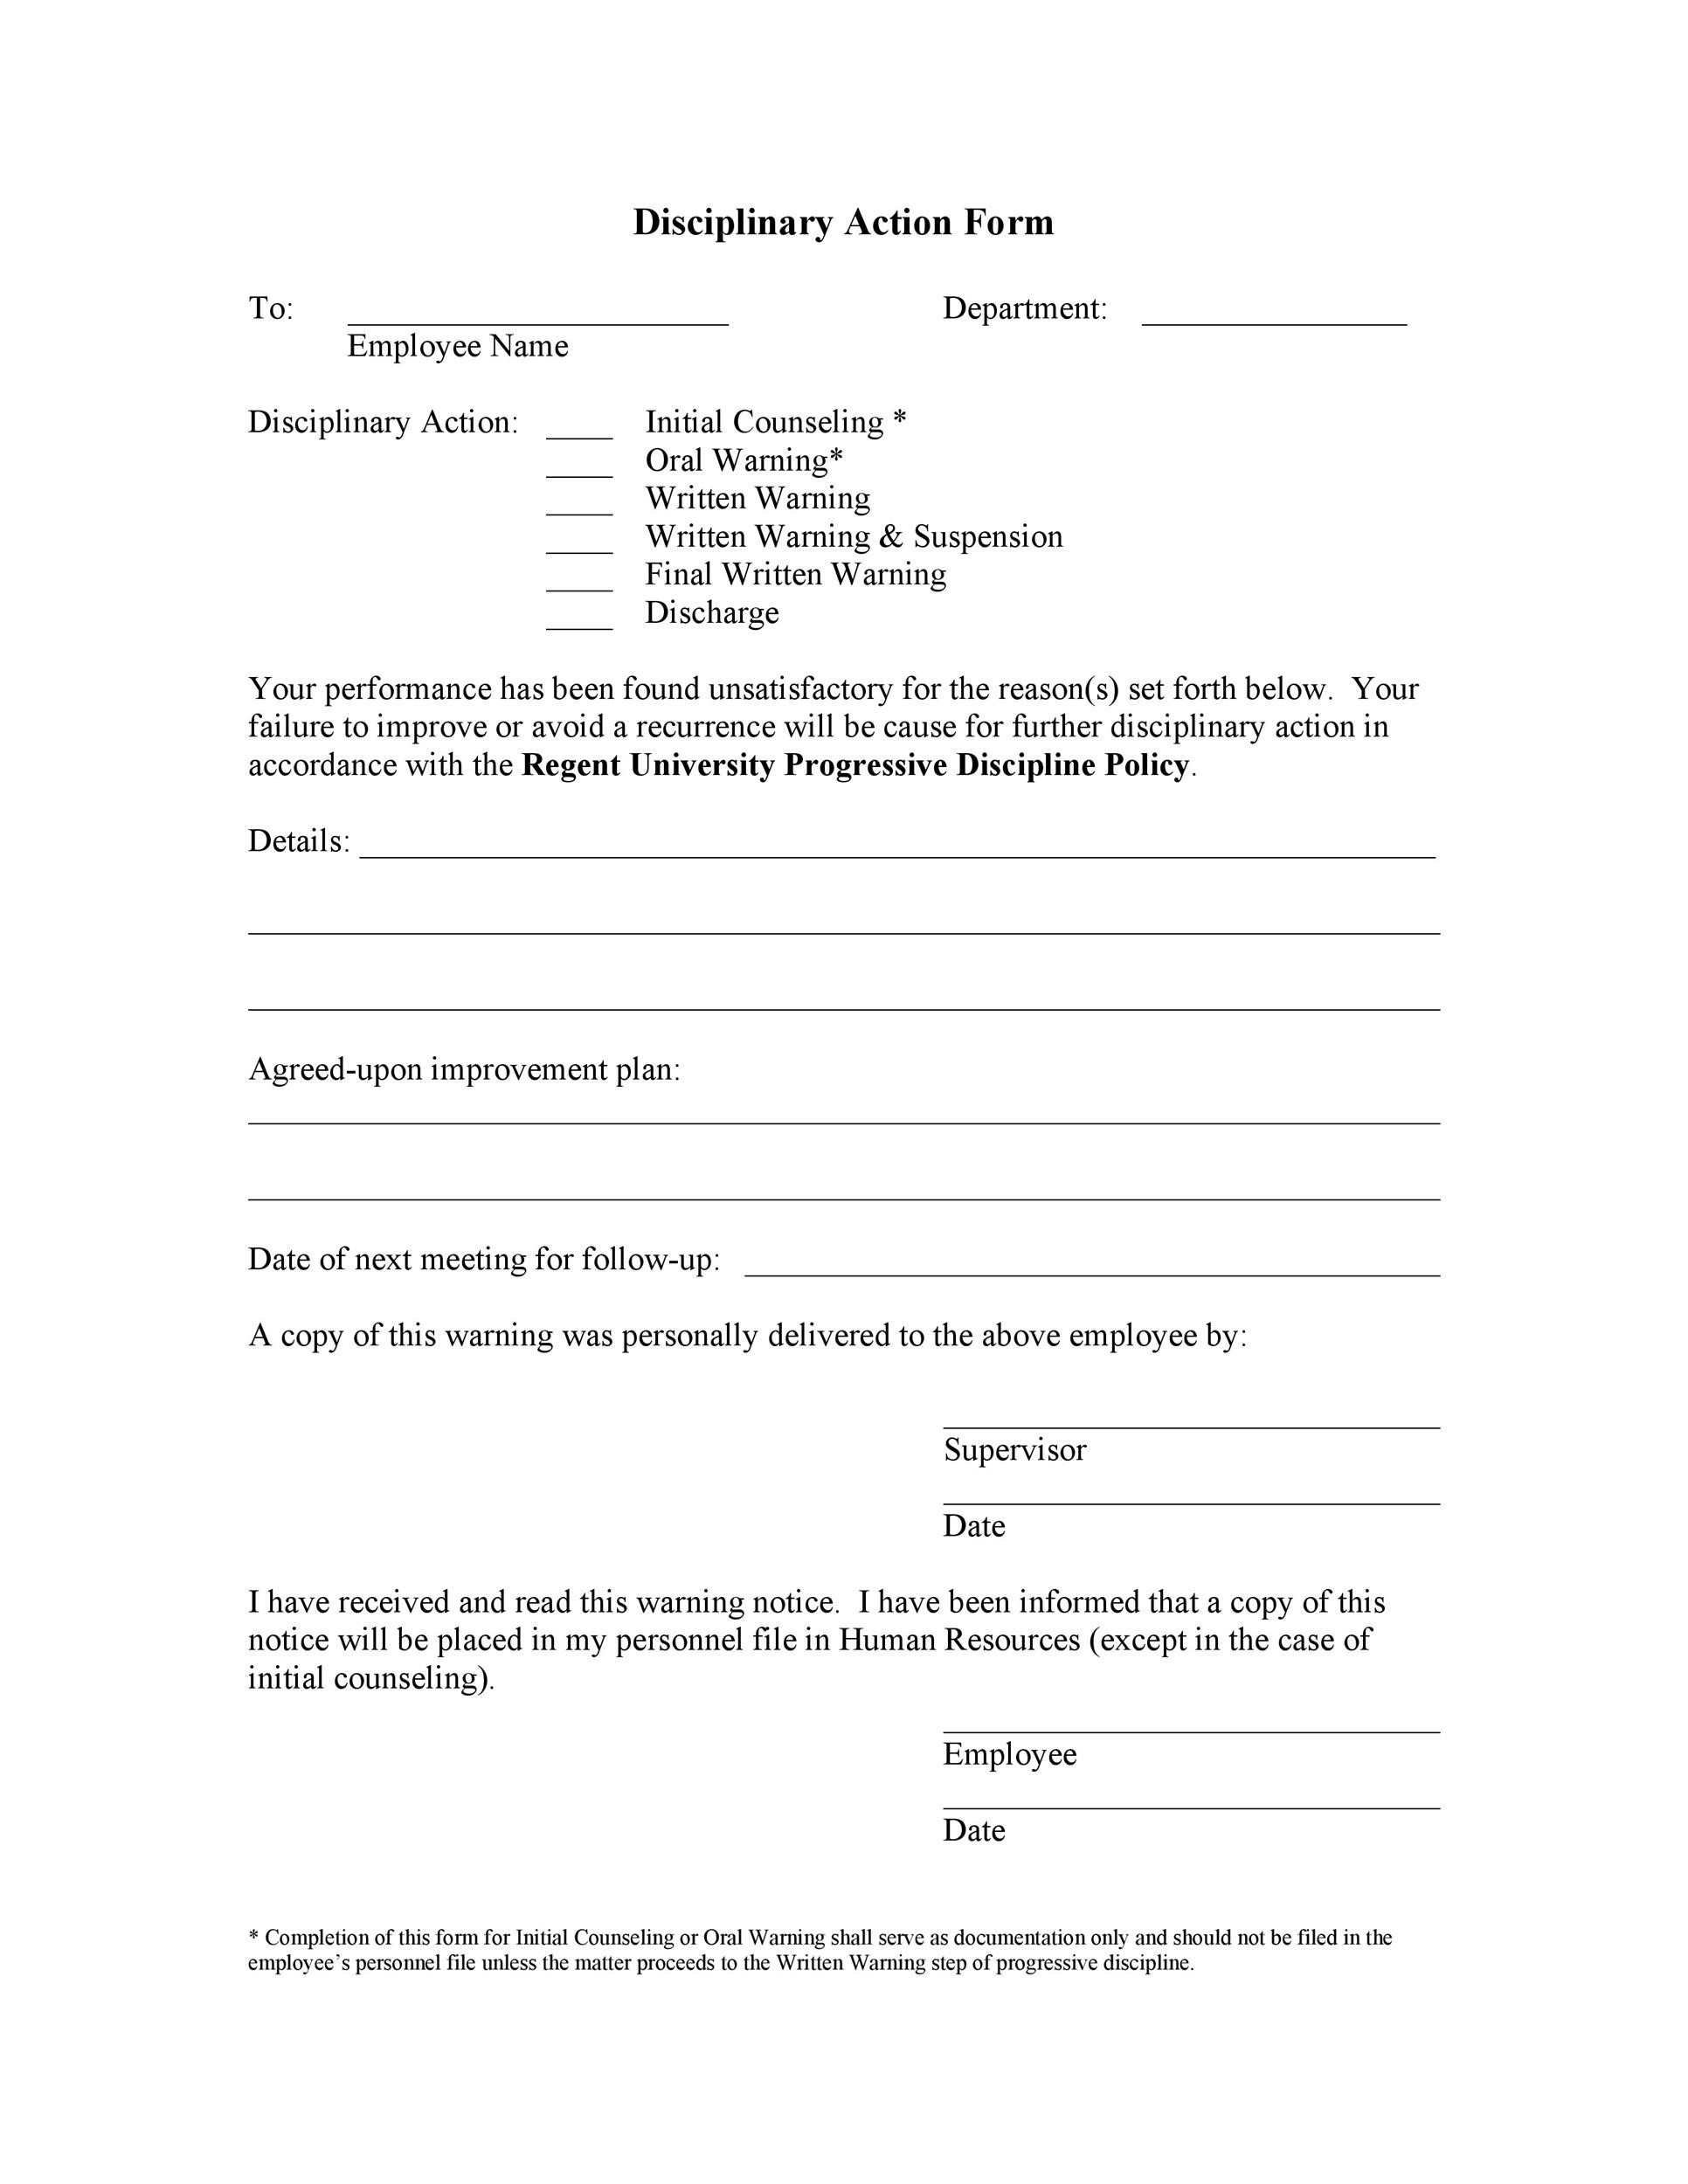 24 Disciplinary Action Form Template Free Popular Templates Design